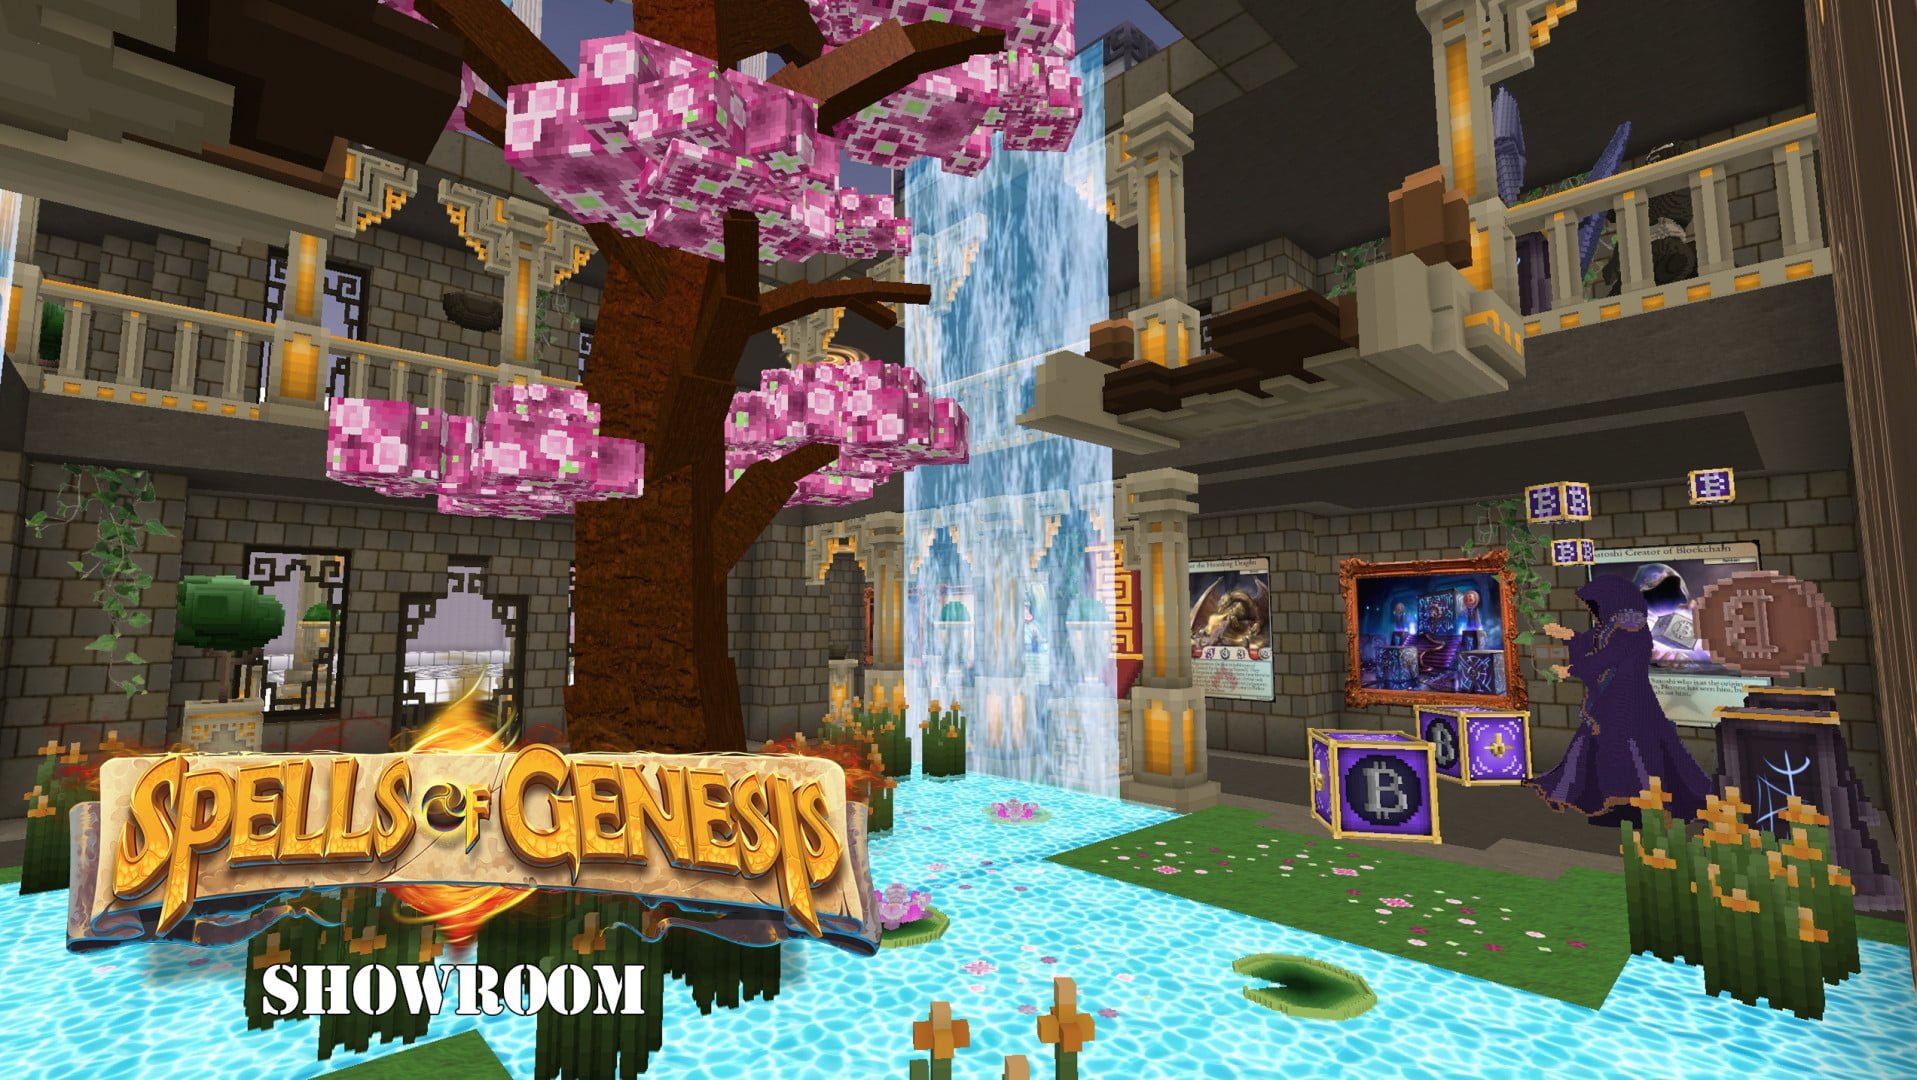 Spells of Genesis Delivers A New Metaverse Experience With Its Unique Showroom On CryptoVoxels 17